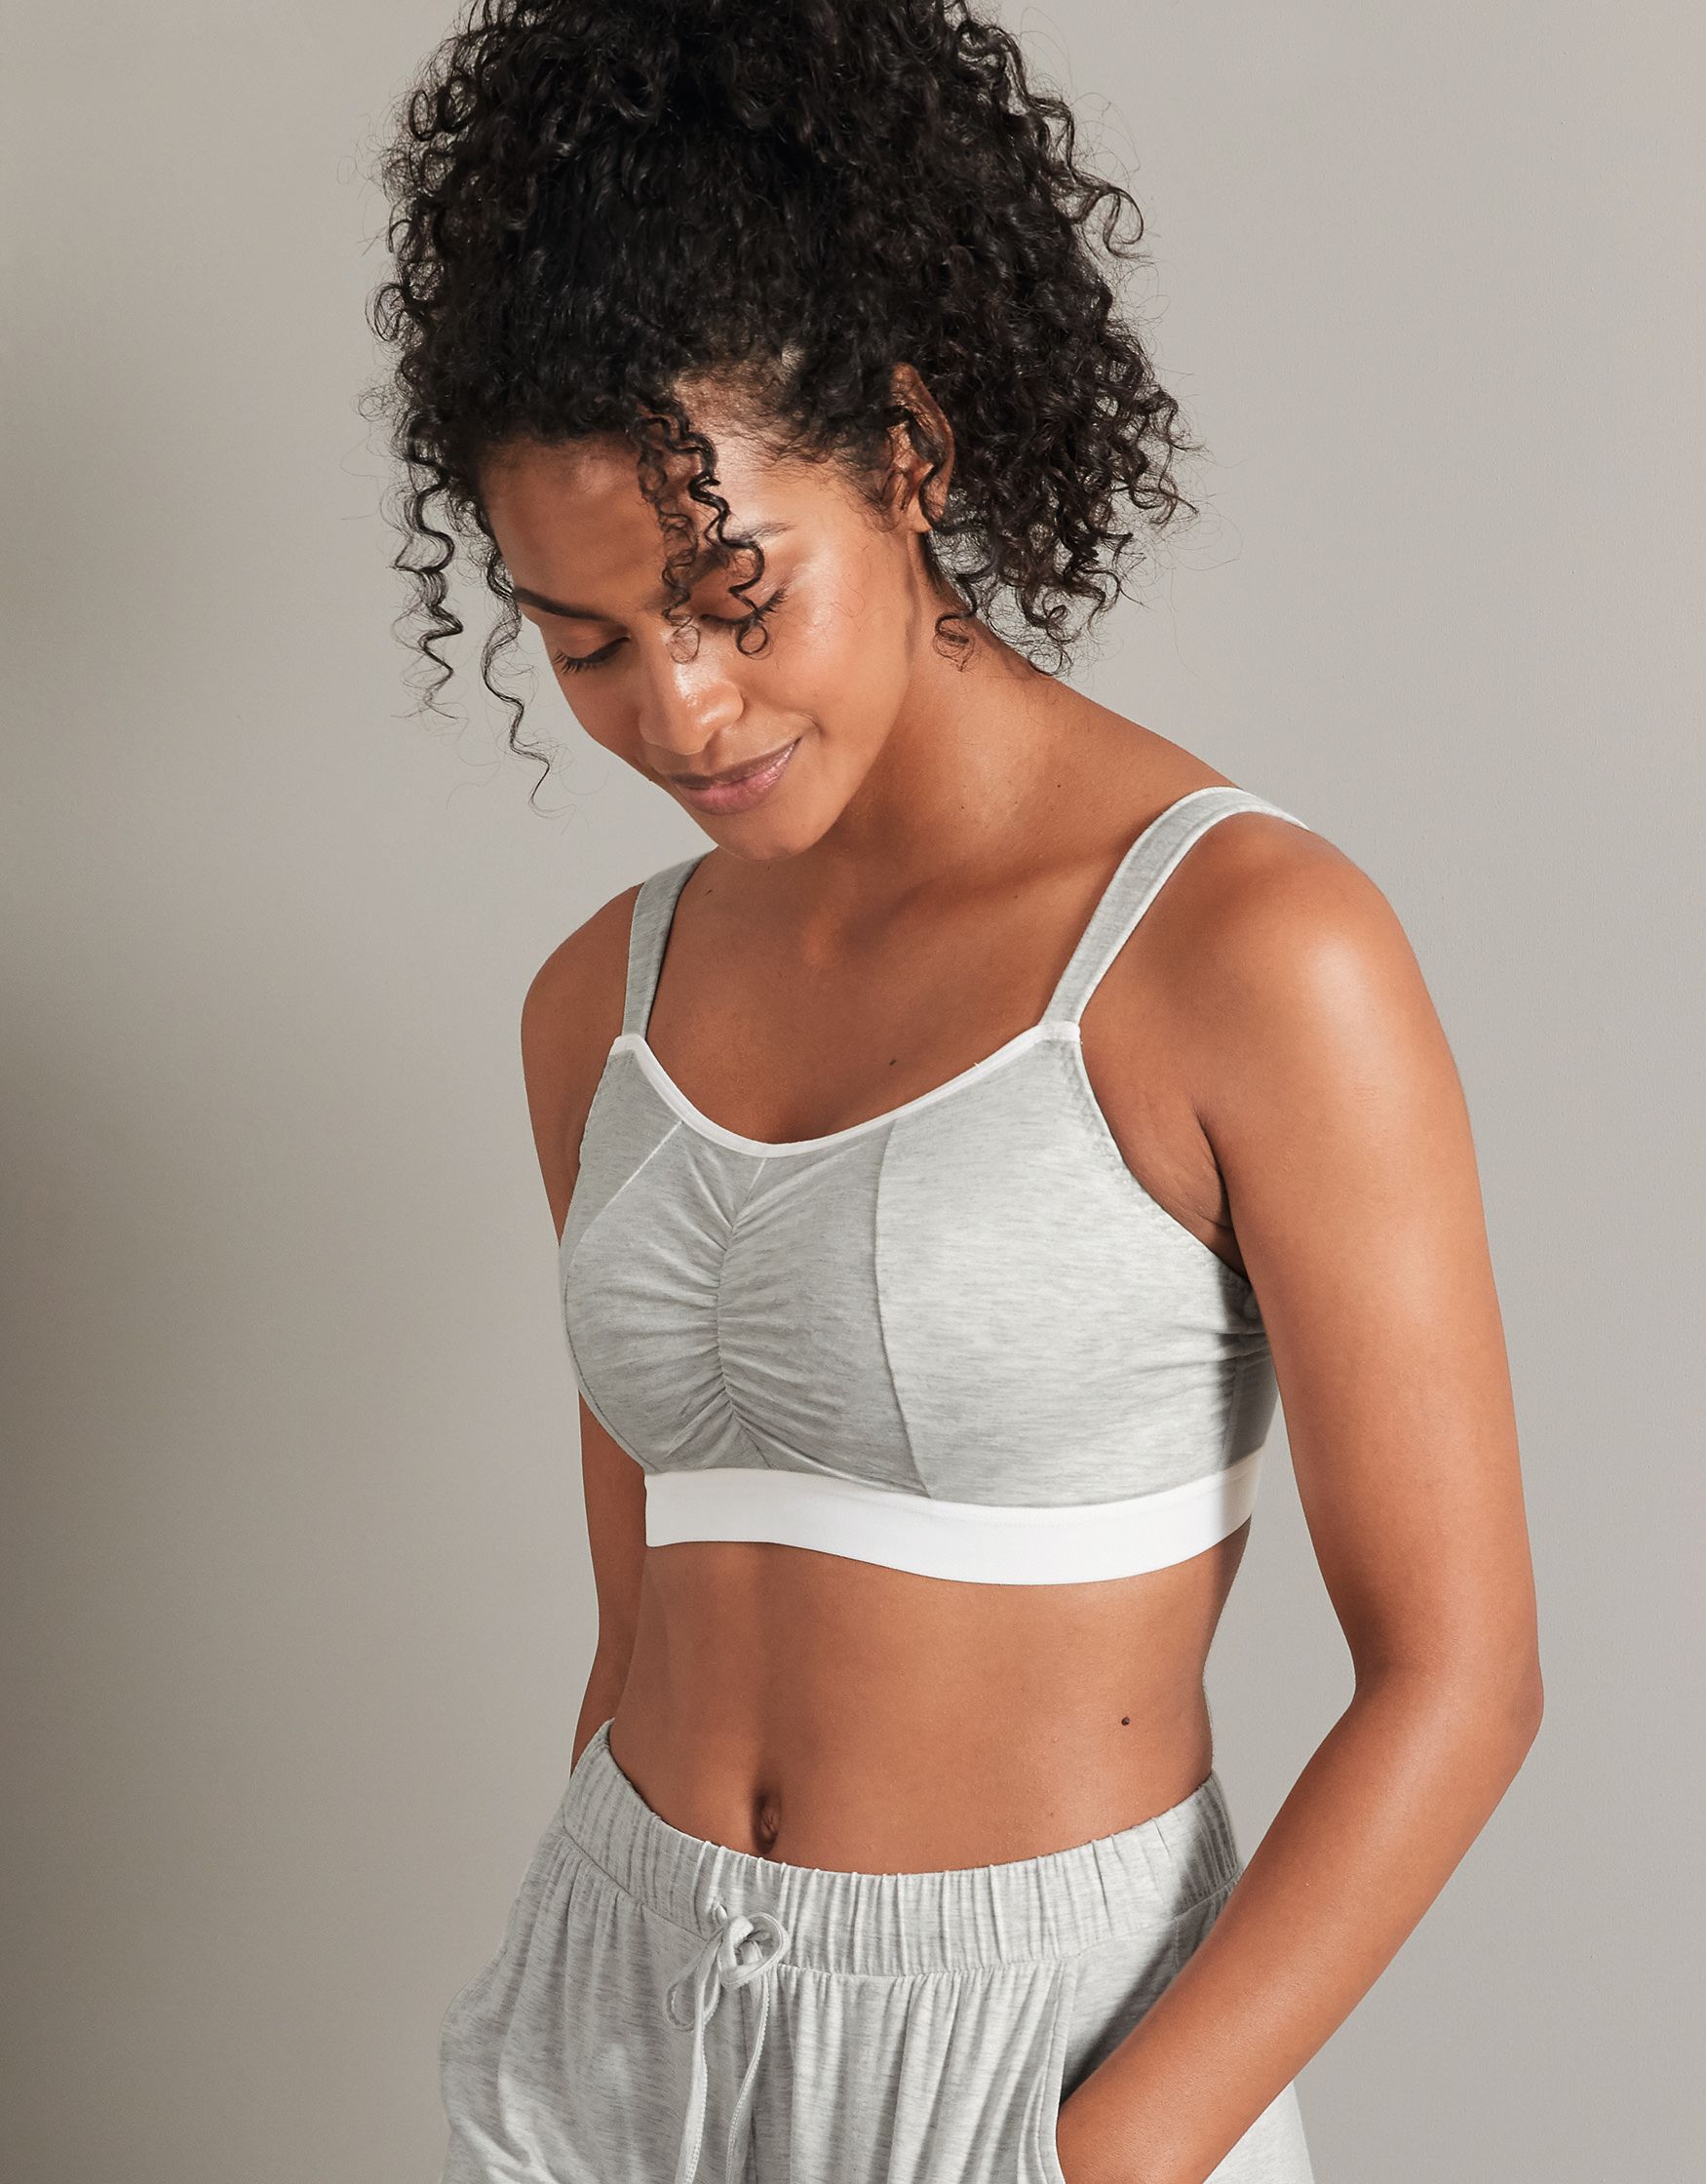 Is sleeping in a sports bra bad for you?